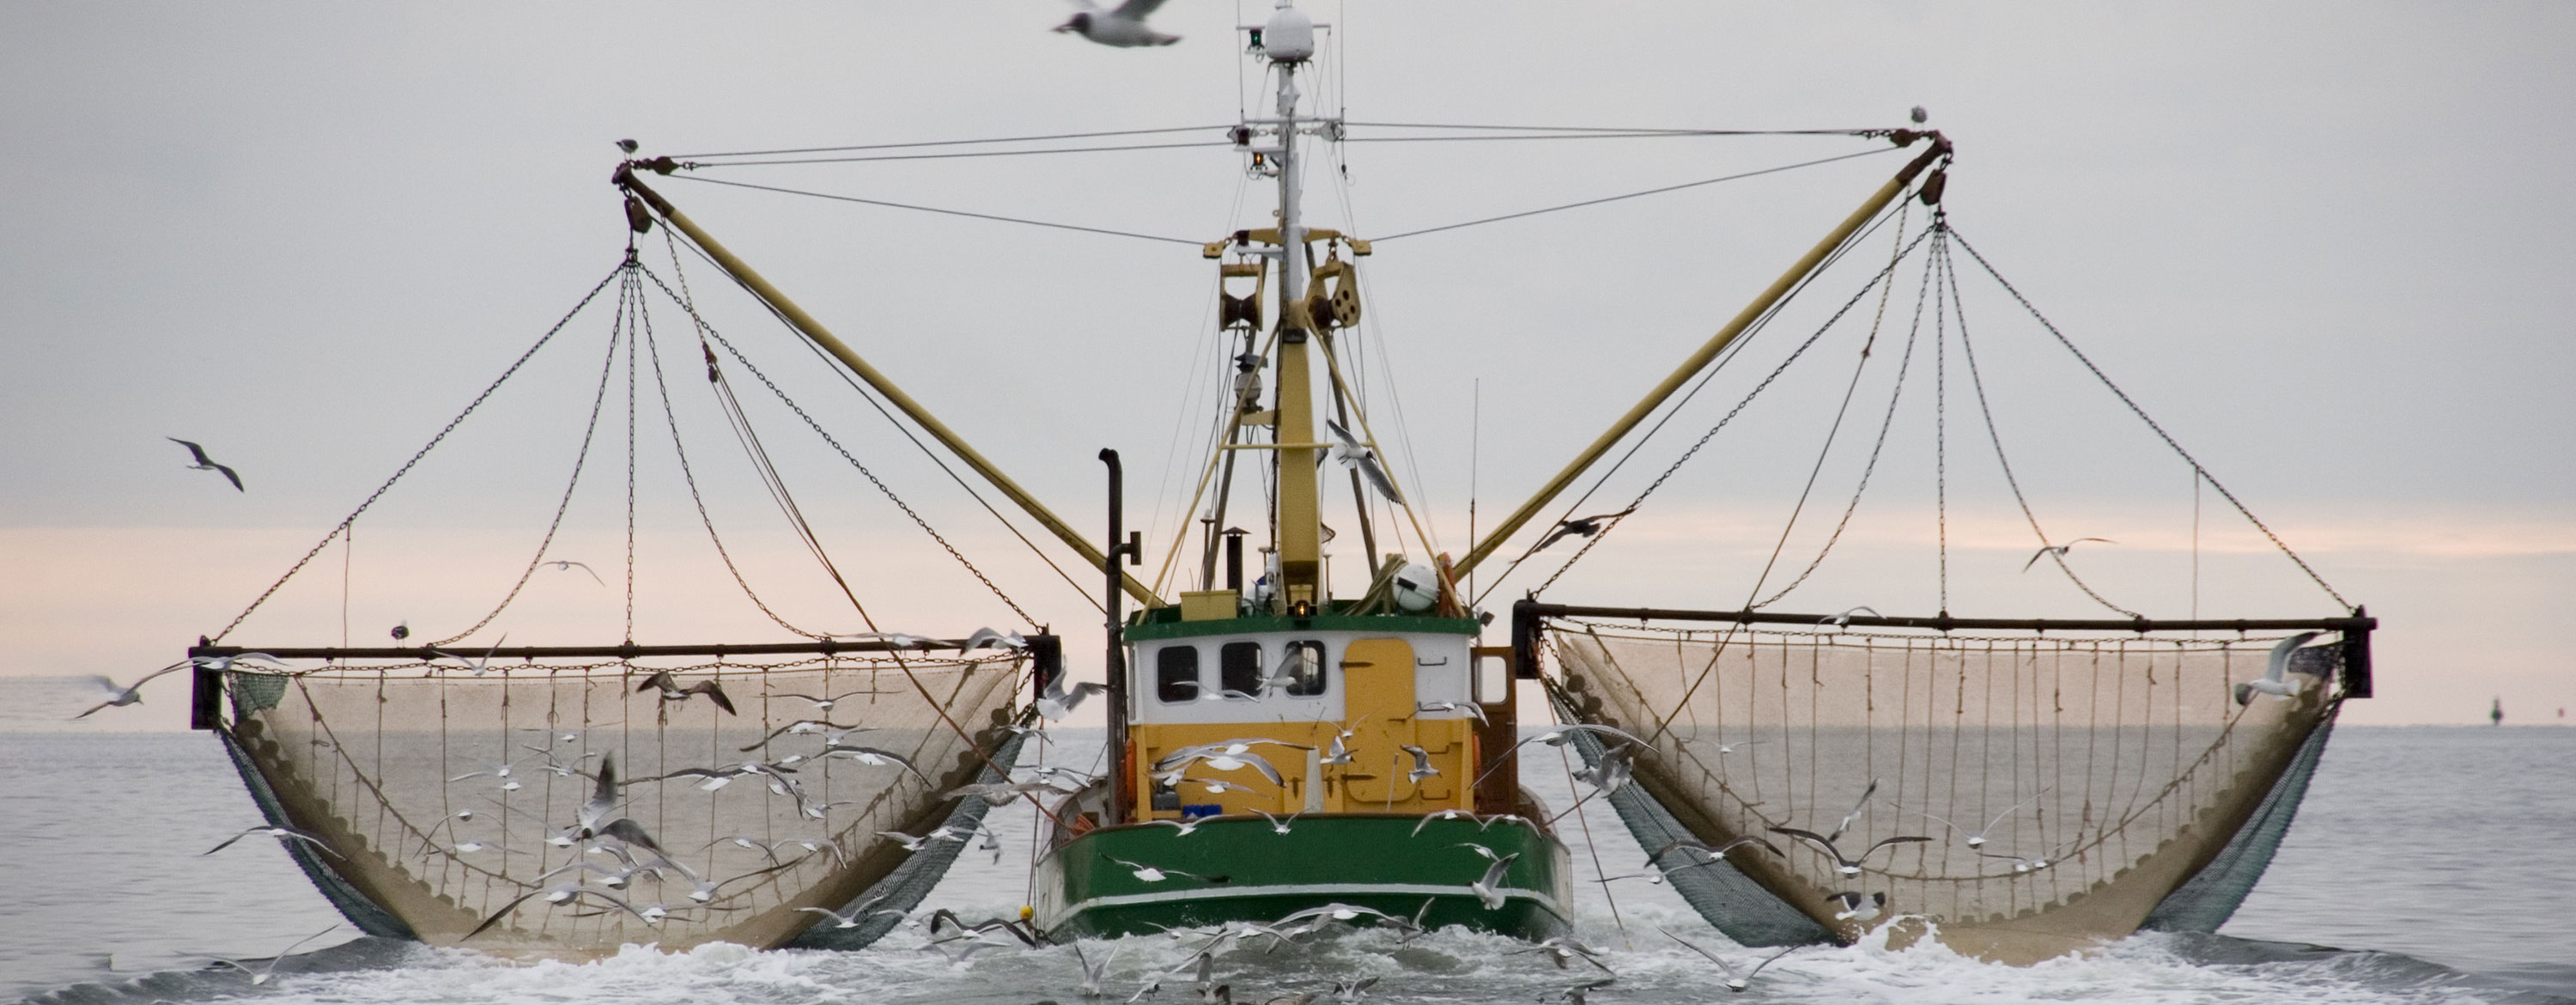 A commercial fishing boat with nets